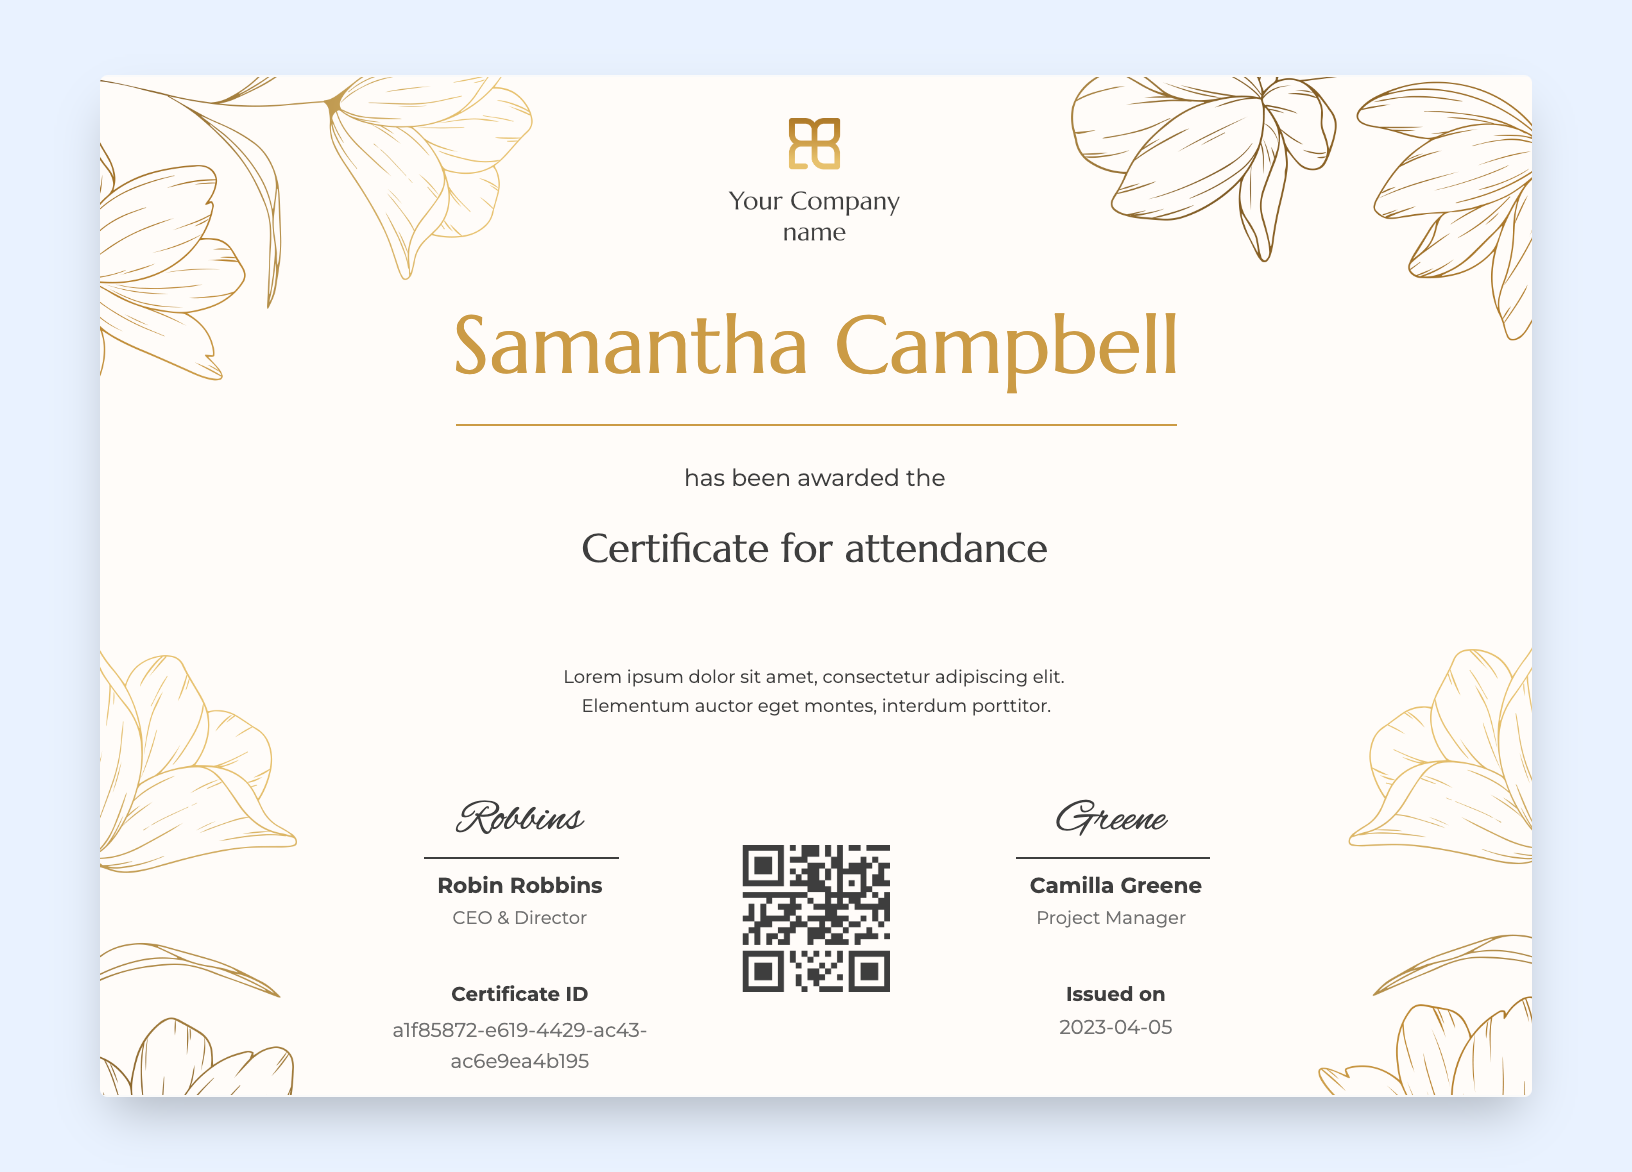 Certificate template with flowers in the background.